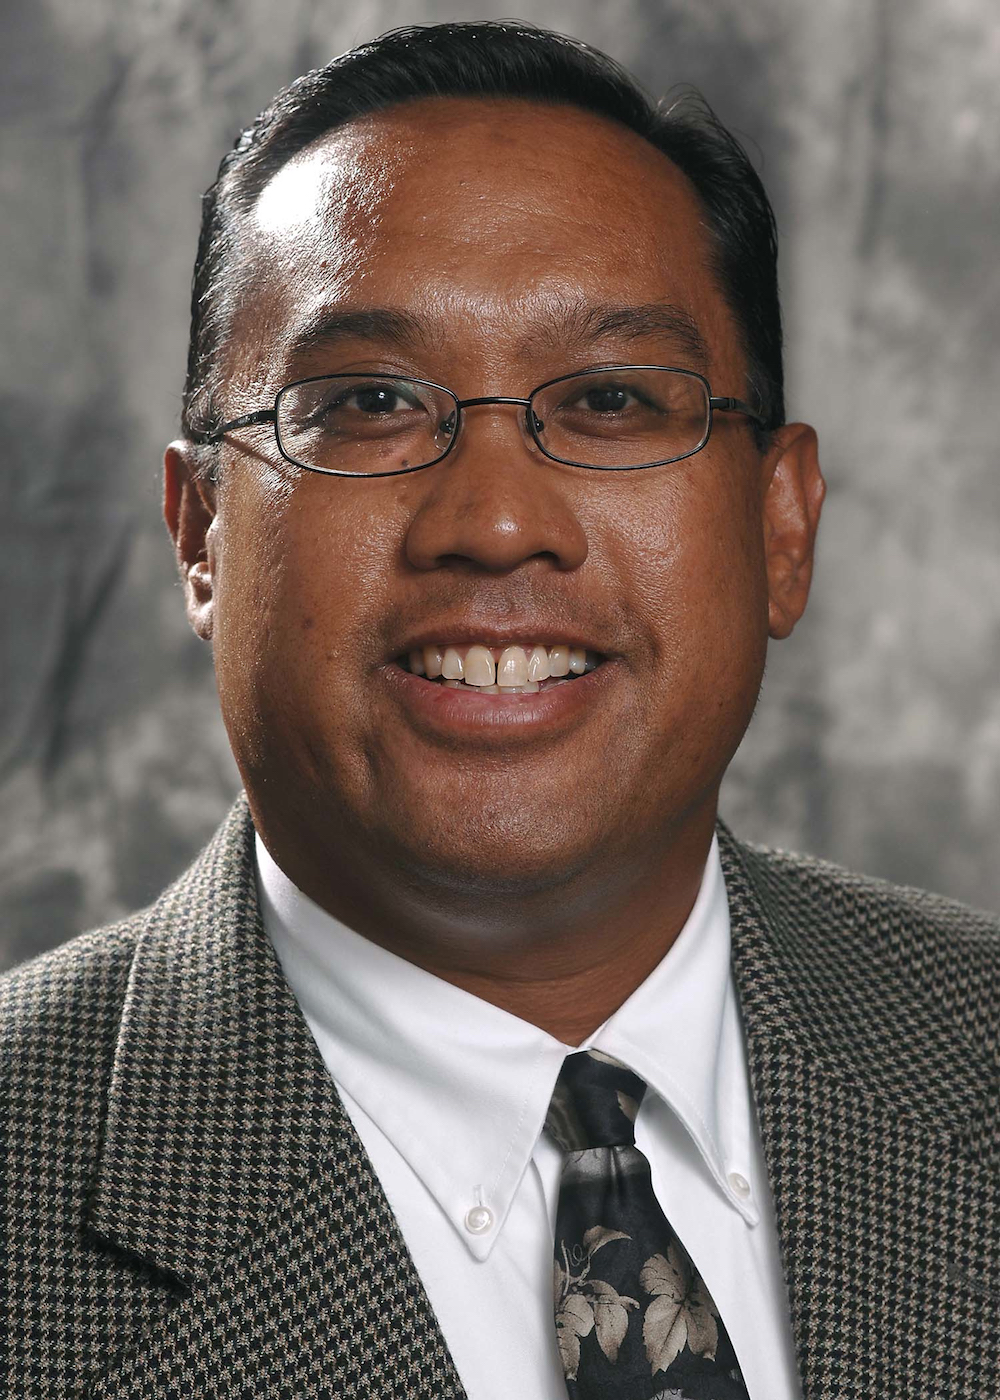 John Salazar joined UGA's College of Agricultural and Environmental Sciences on May 1 as coordinator for the Department of Agricultural and Applied Economics’ new hospitality and food industry management major.